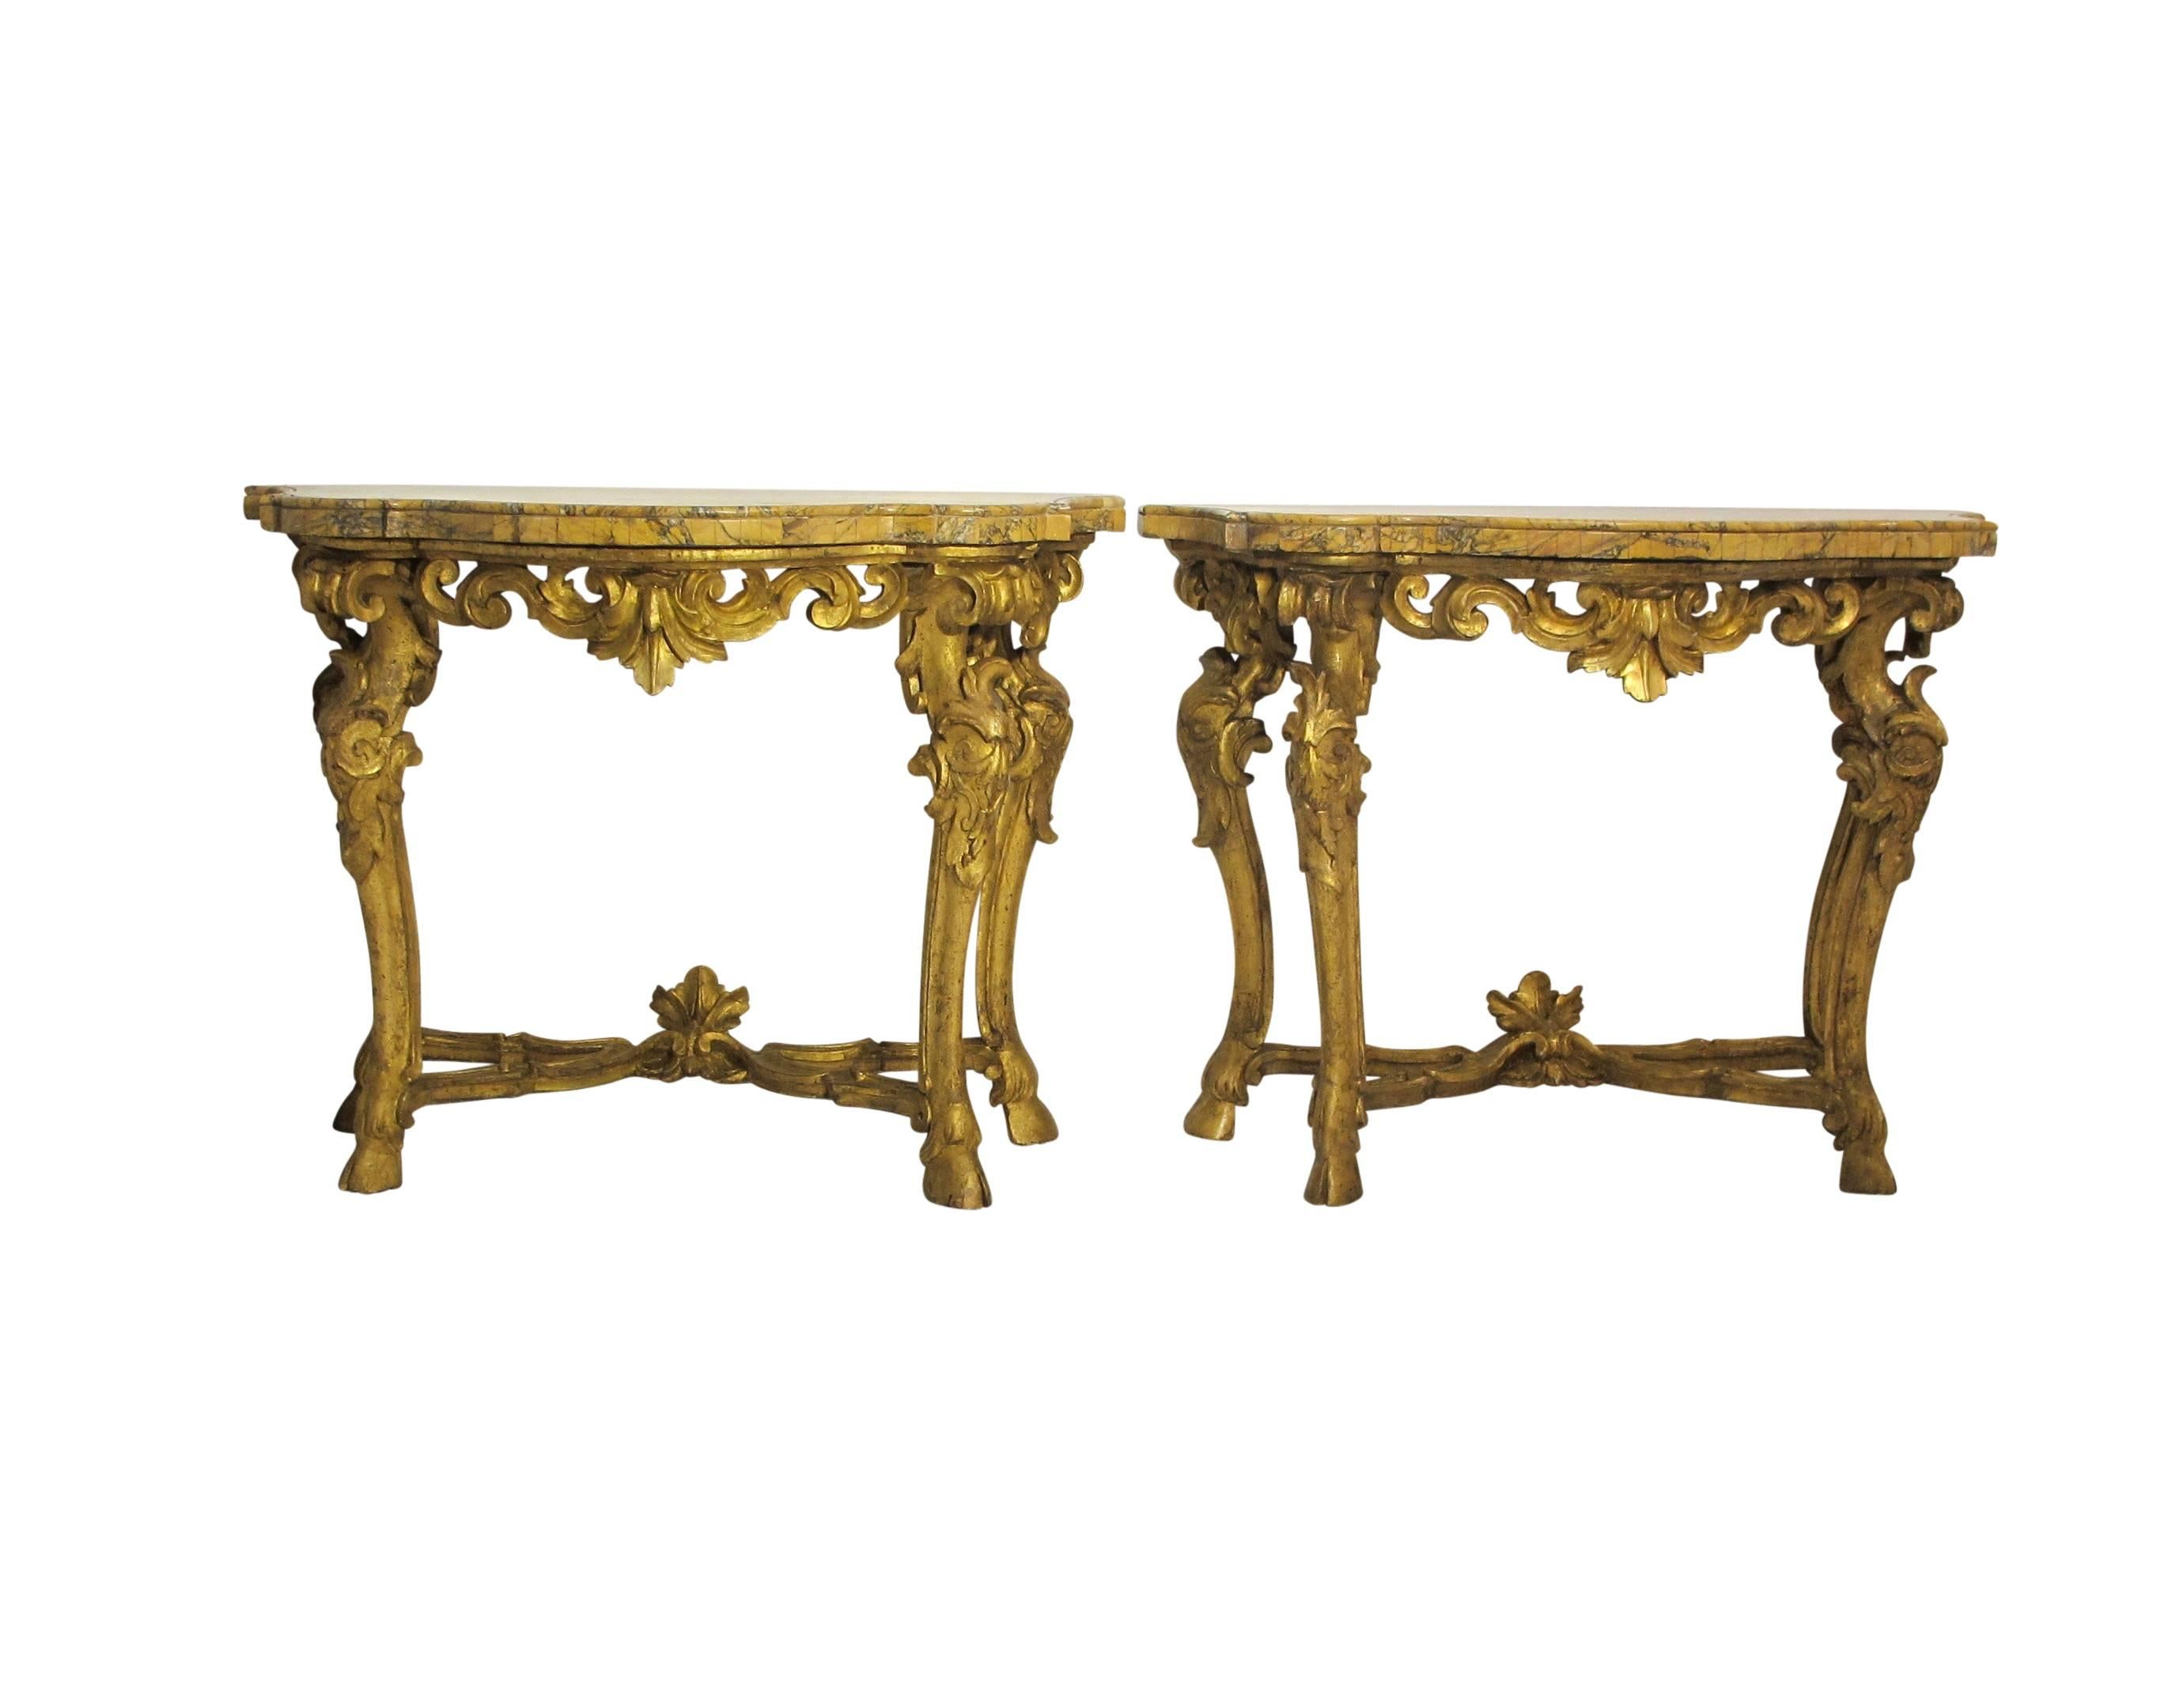 A pair of remarkable carved and gilt serpentine shaped console tables with violet breche marble tops. Beautifully carved with C scrolls and acanthus leaves, standing on cabriole legs ending in hoof feet. Italy, late 18th century.
These tables are